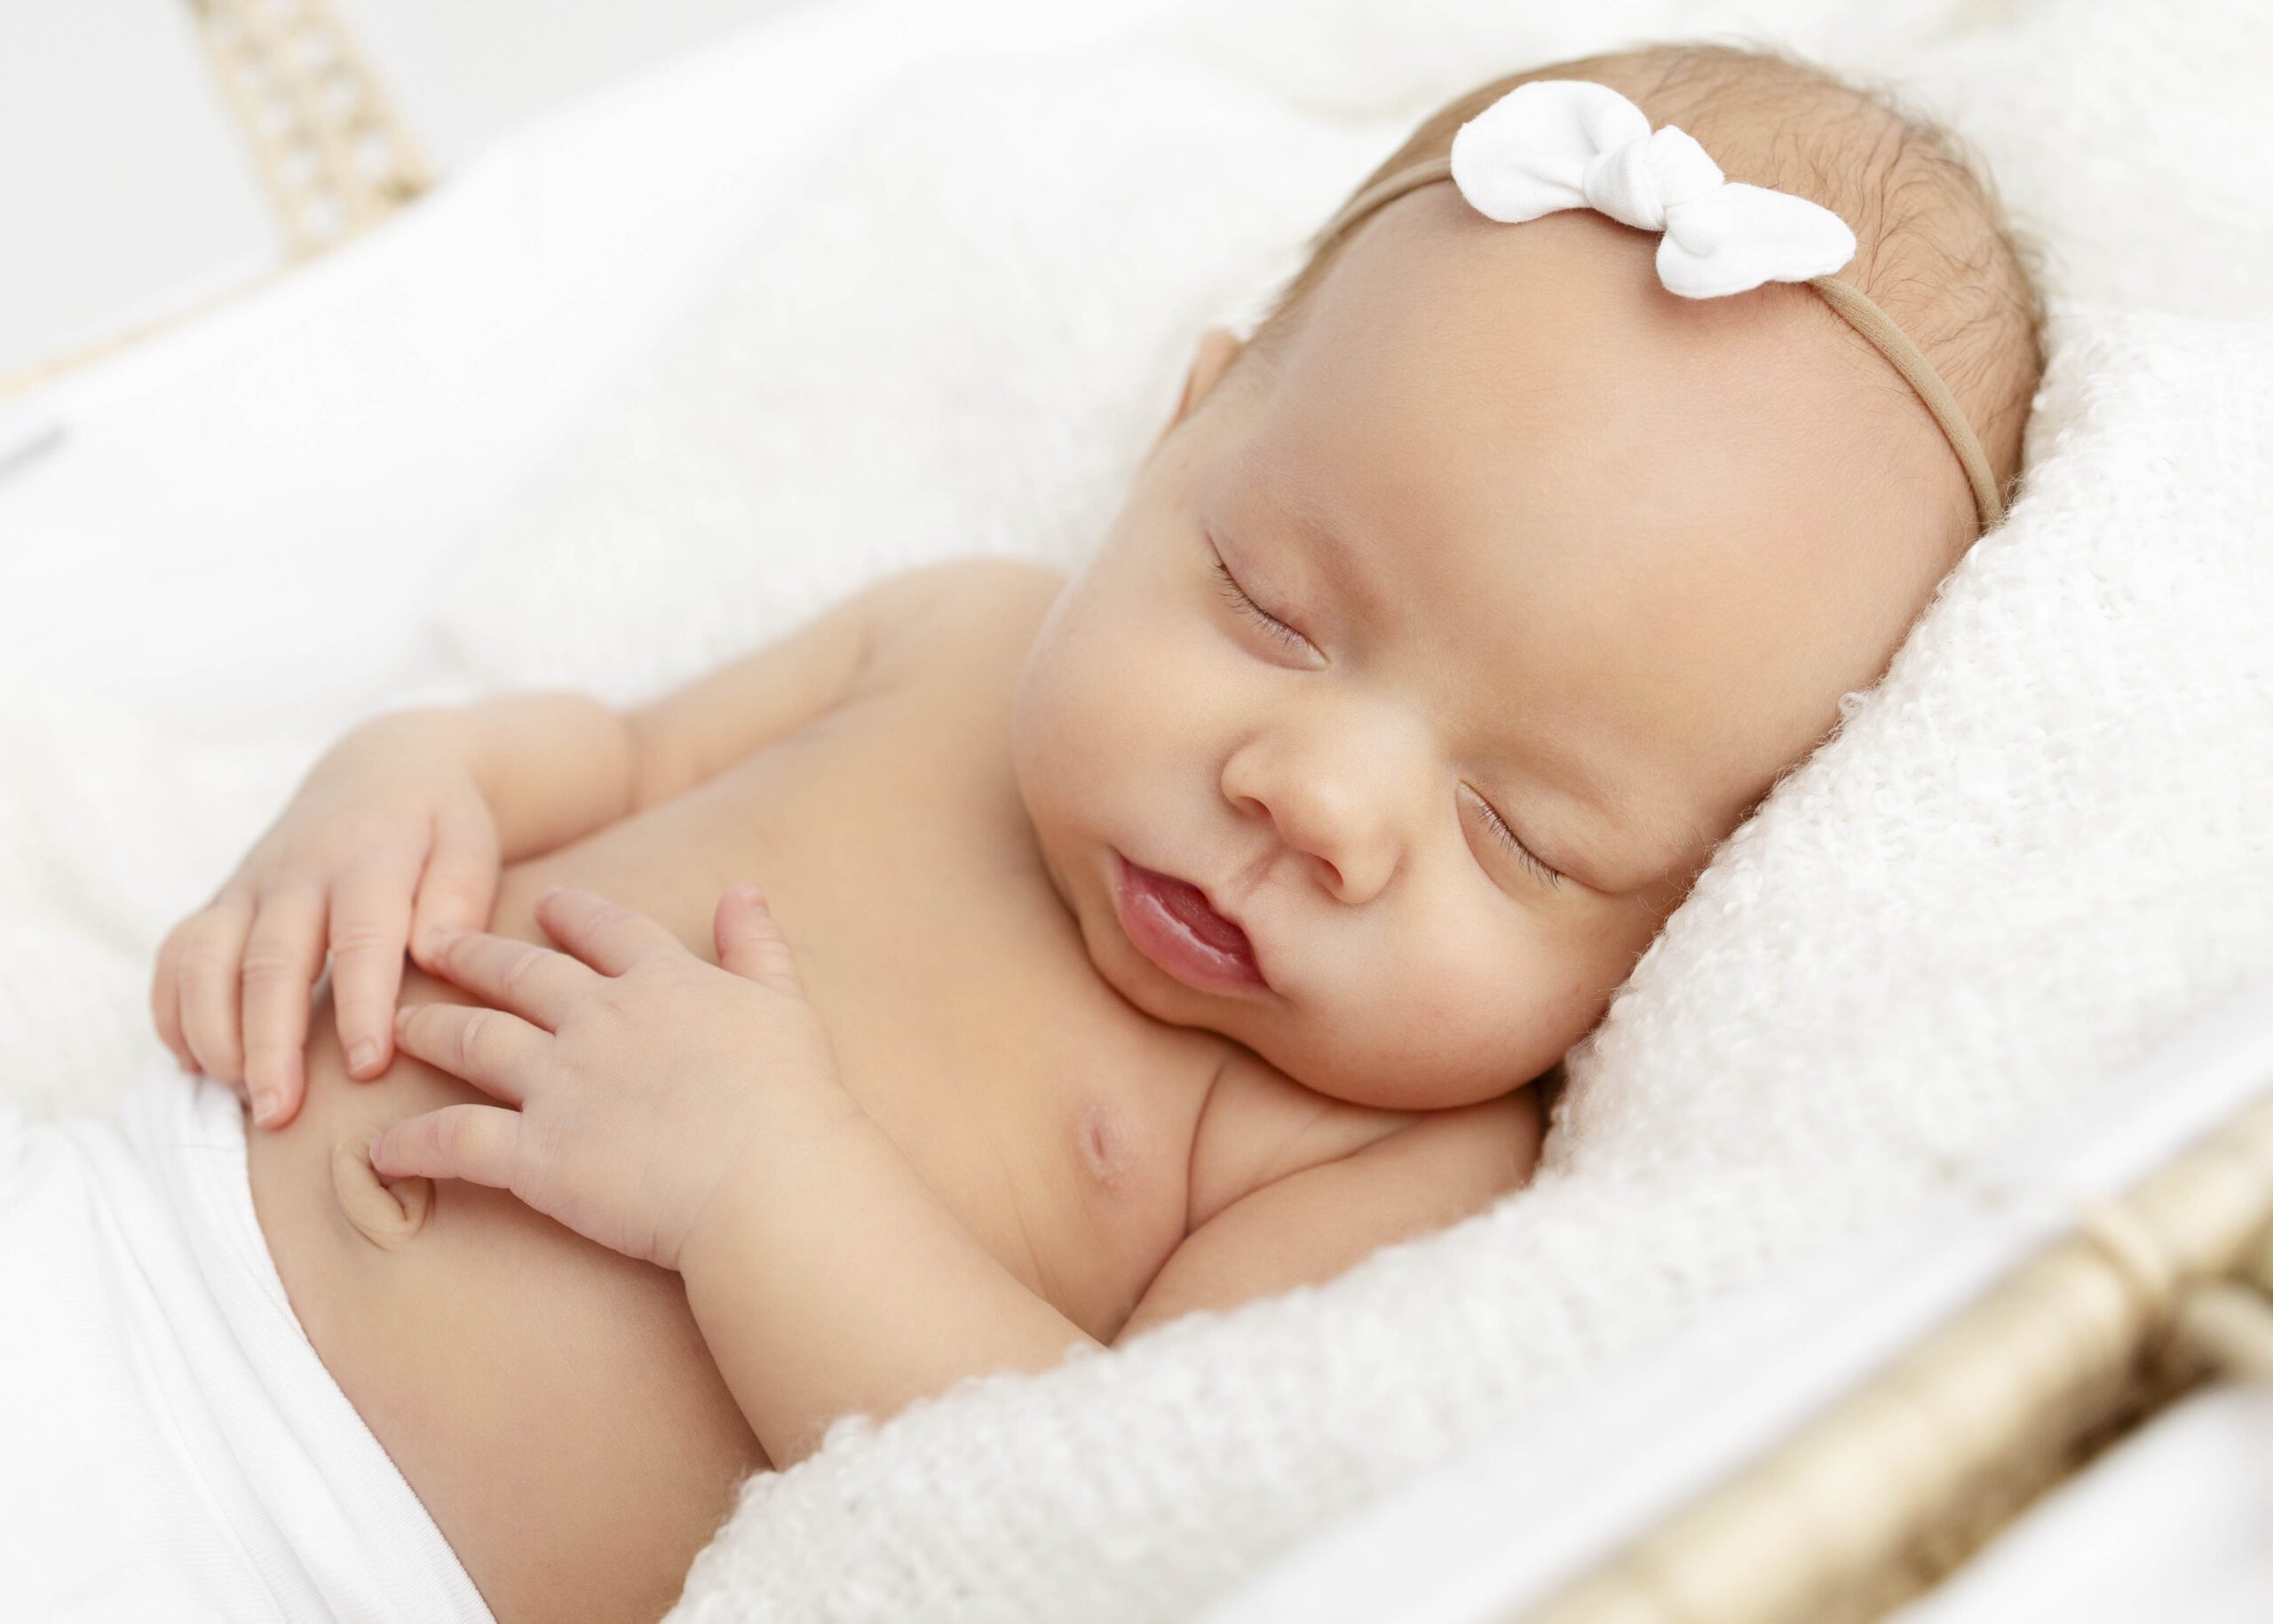 Newborn girl sleeping surrounded by fluffy white blankets